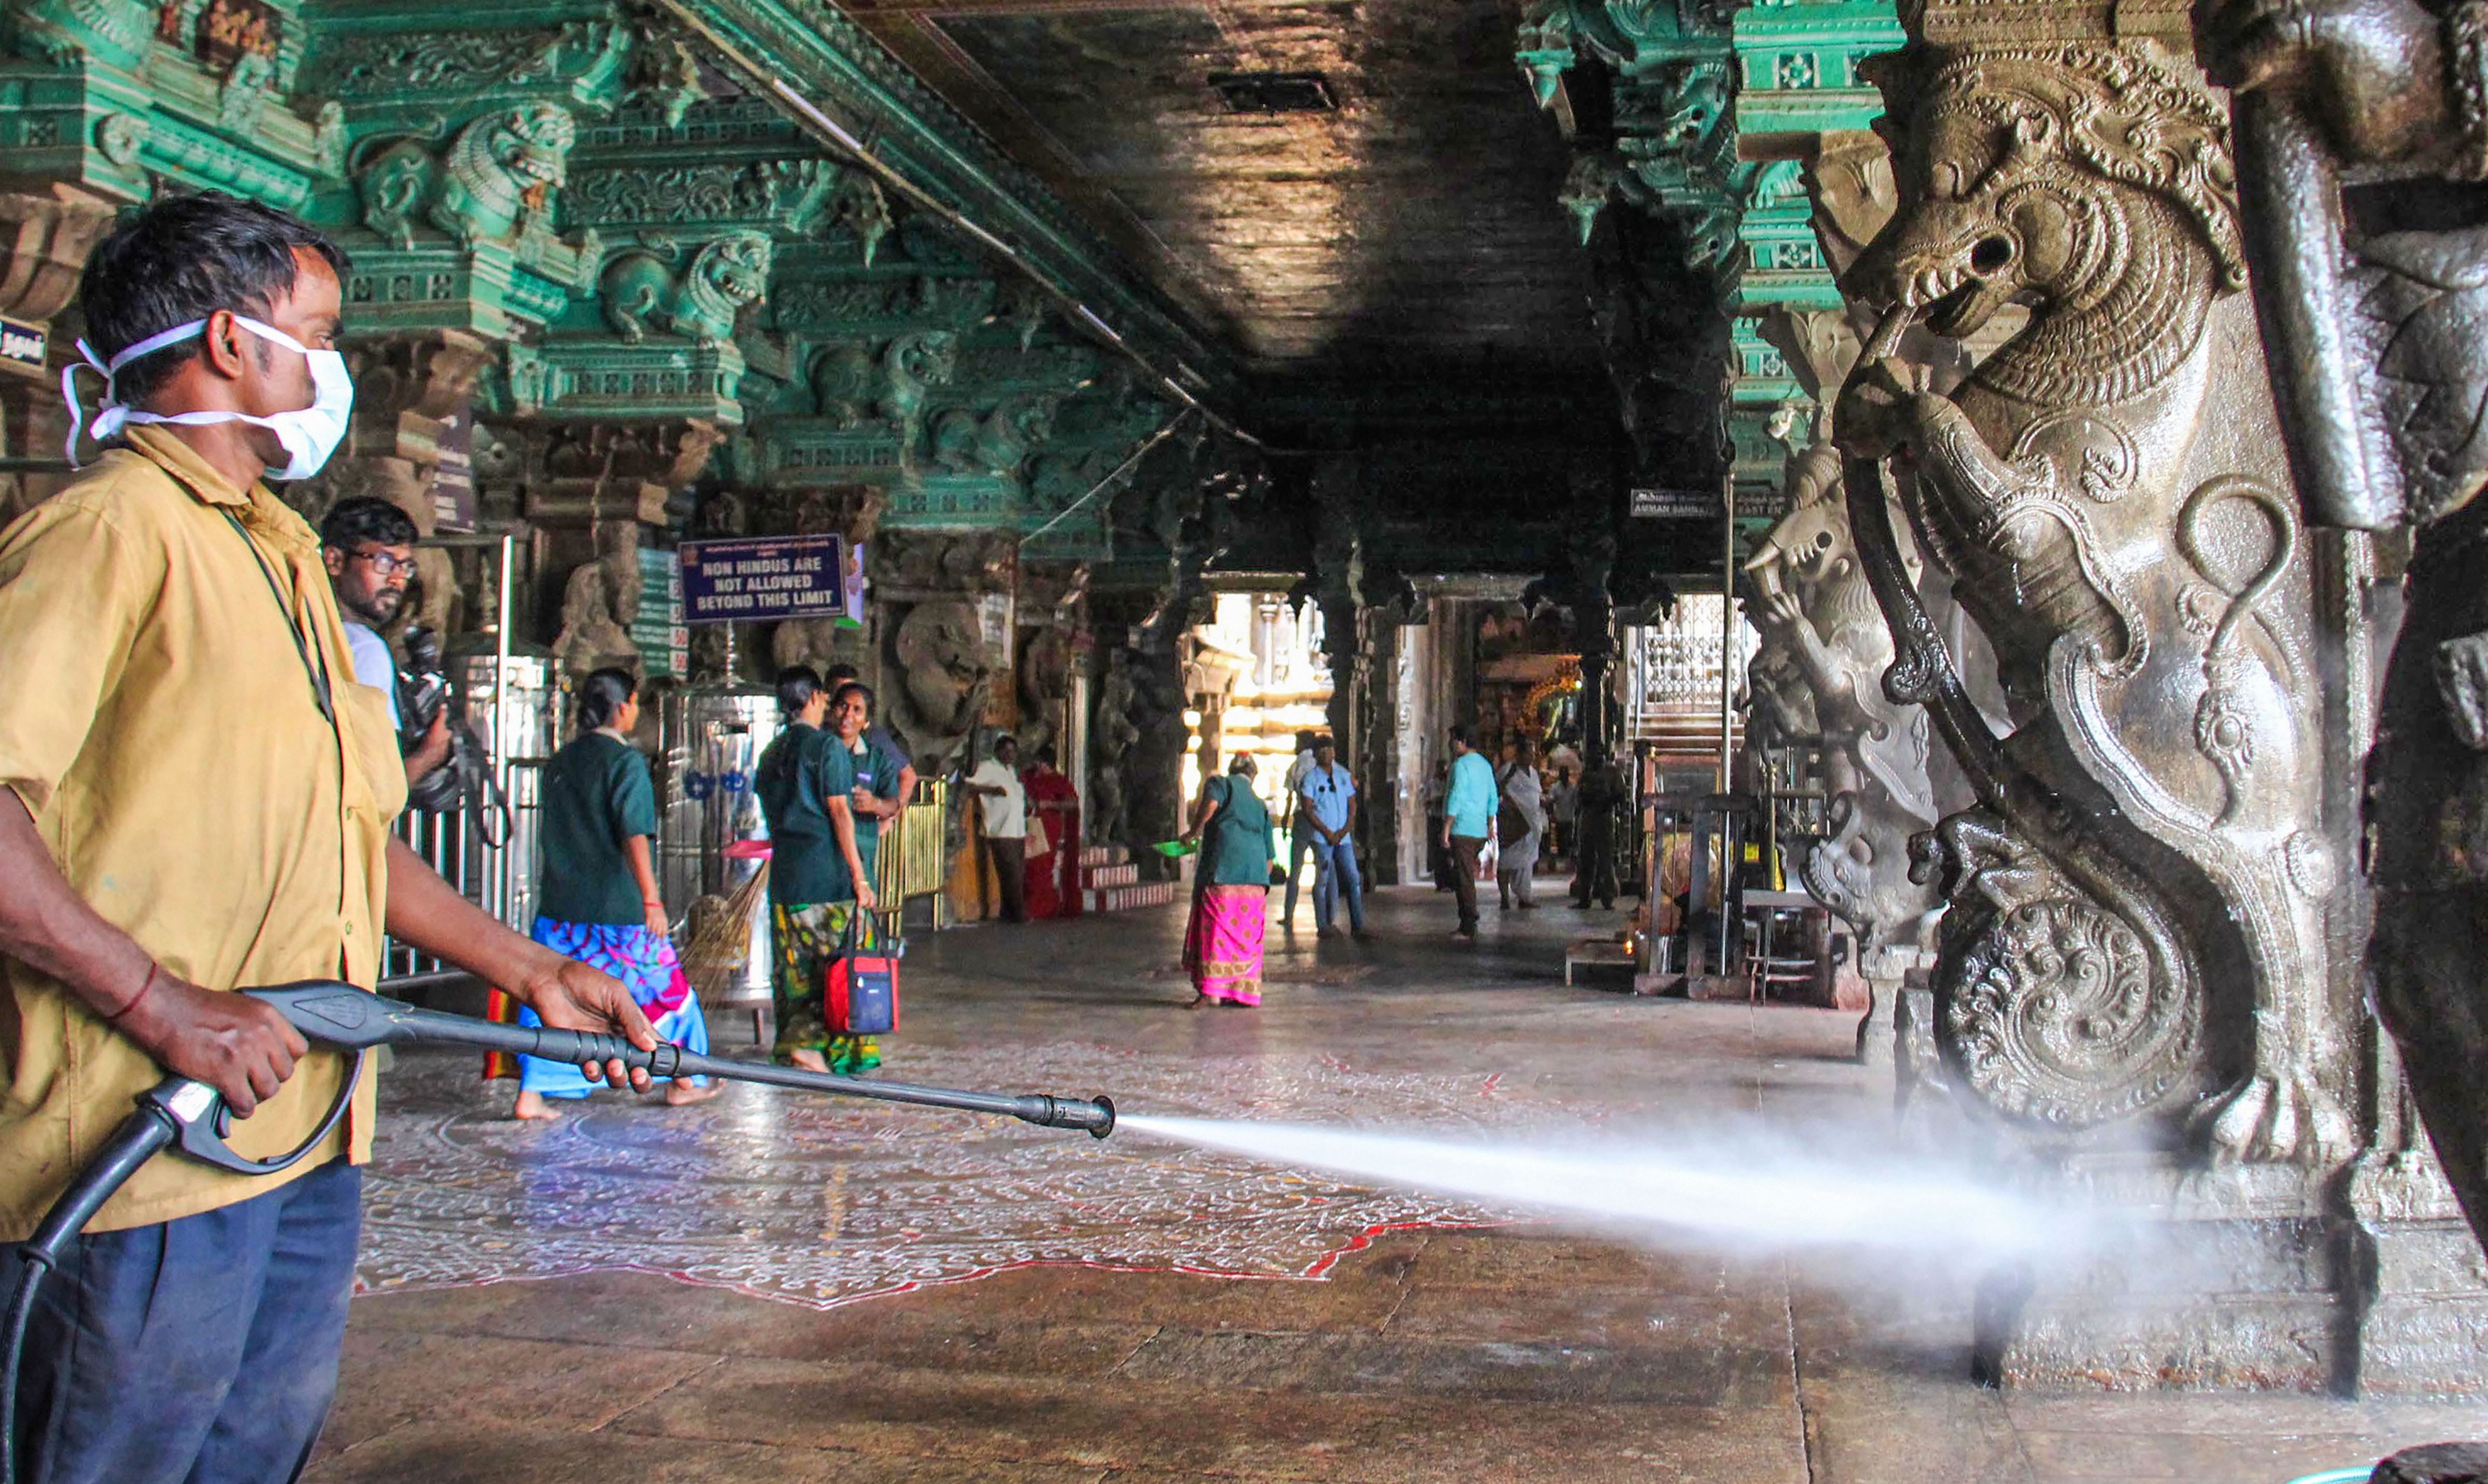 A health official sprays disinfectants in the premises of Meenakshi Amman temple in the wake of coronavirus (COVID -19) pandemic, in Madurai, Monday, March 16, 2020